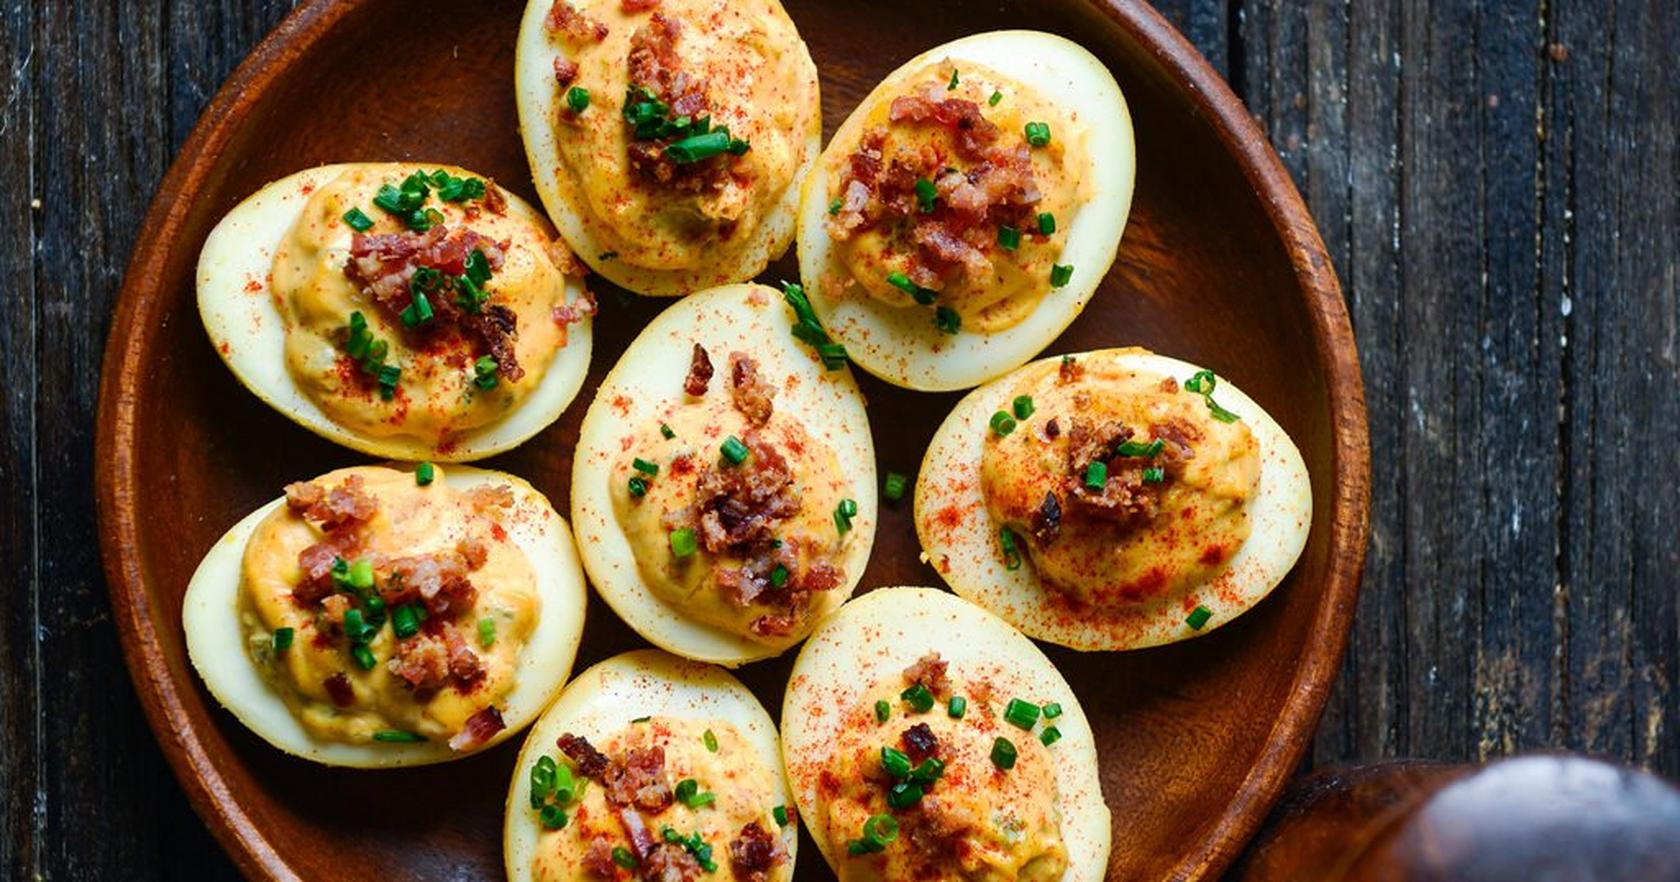 image of Traeger Smoked Deviled Eggs